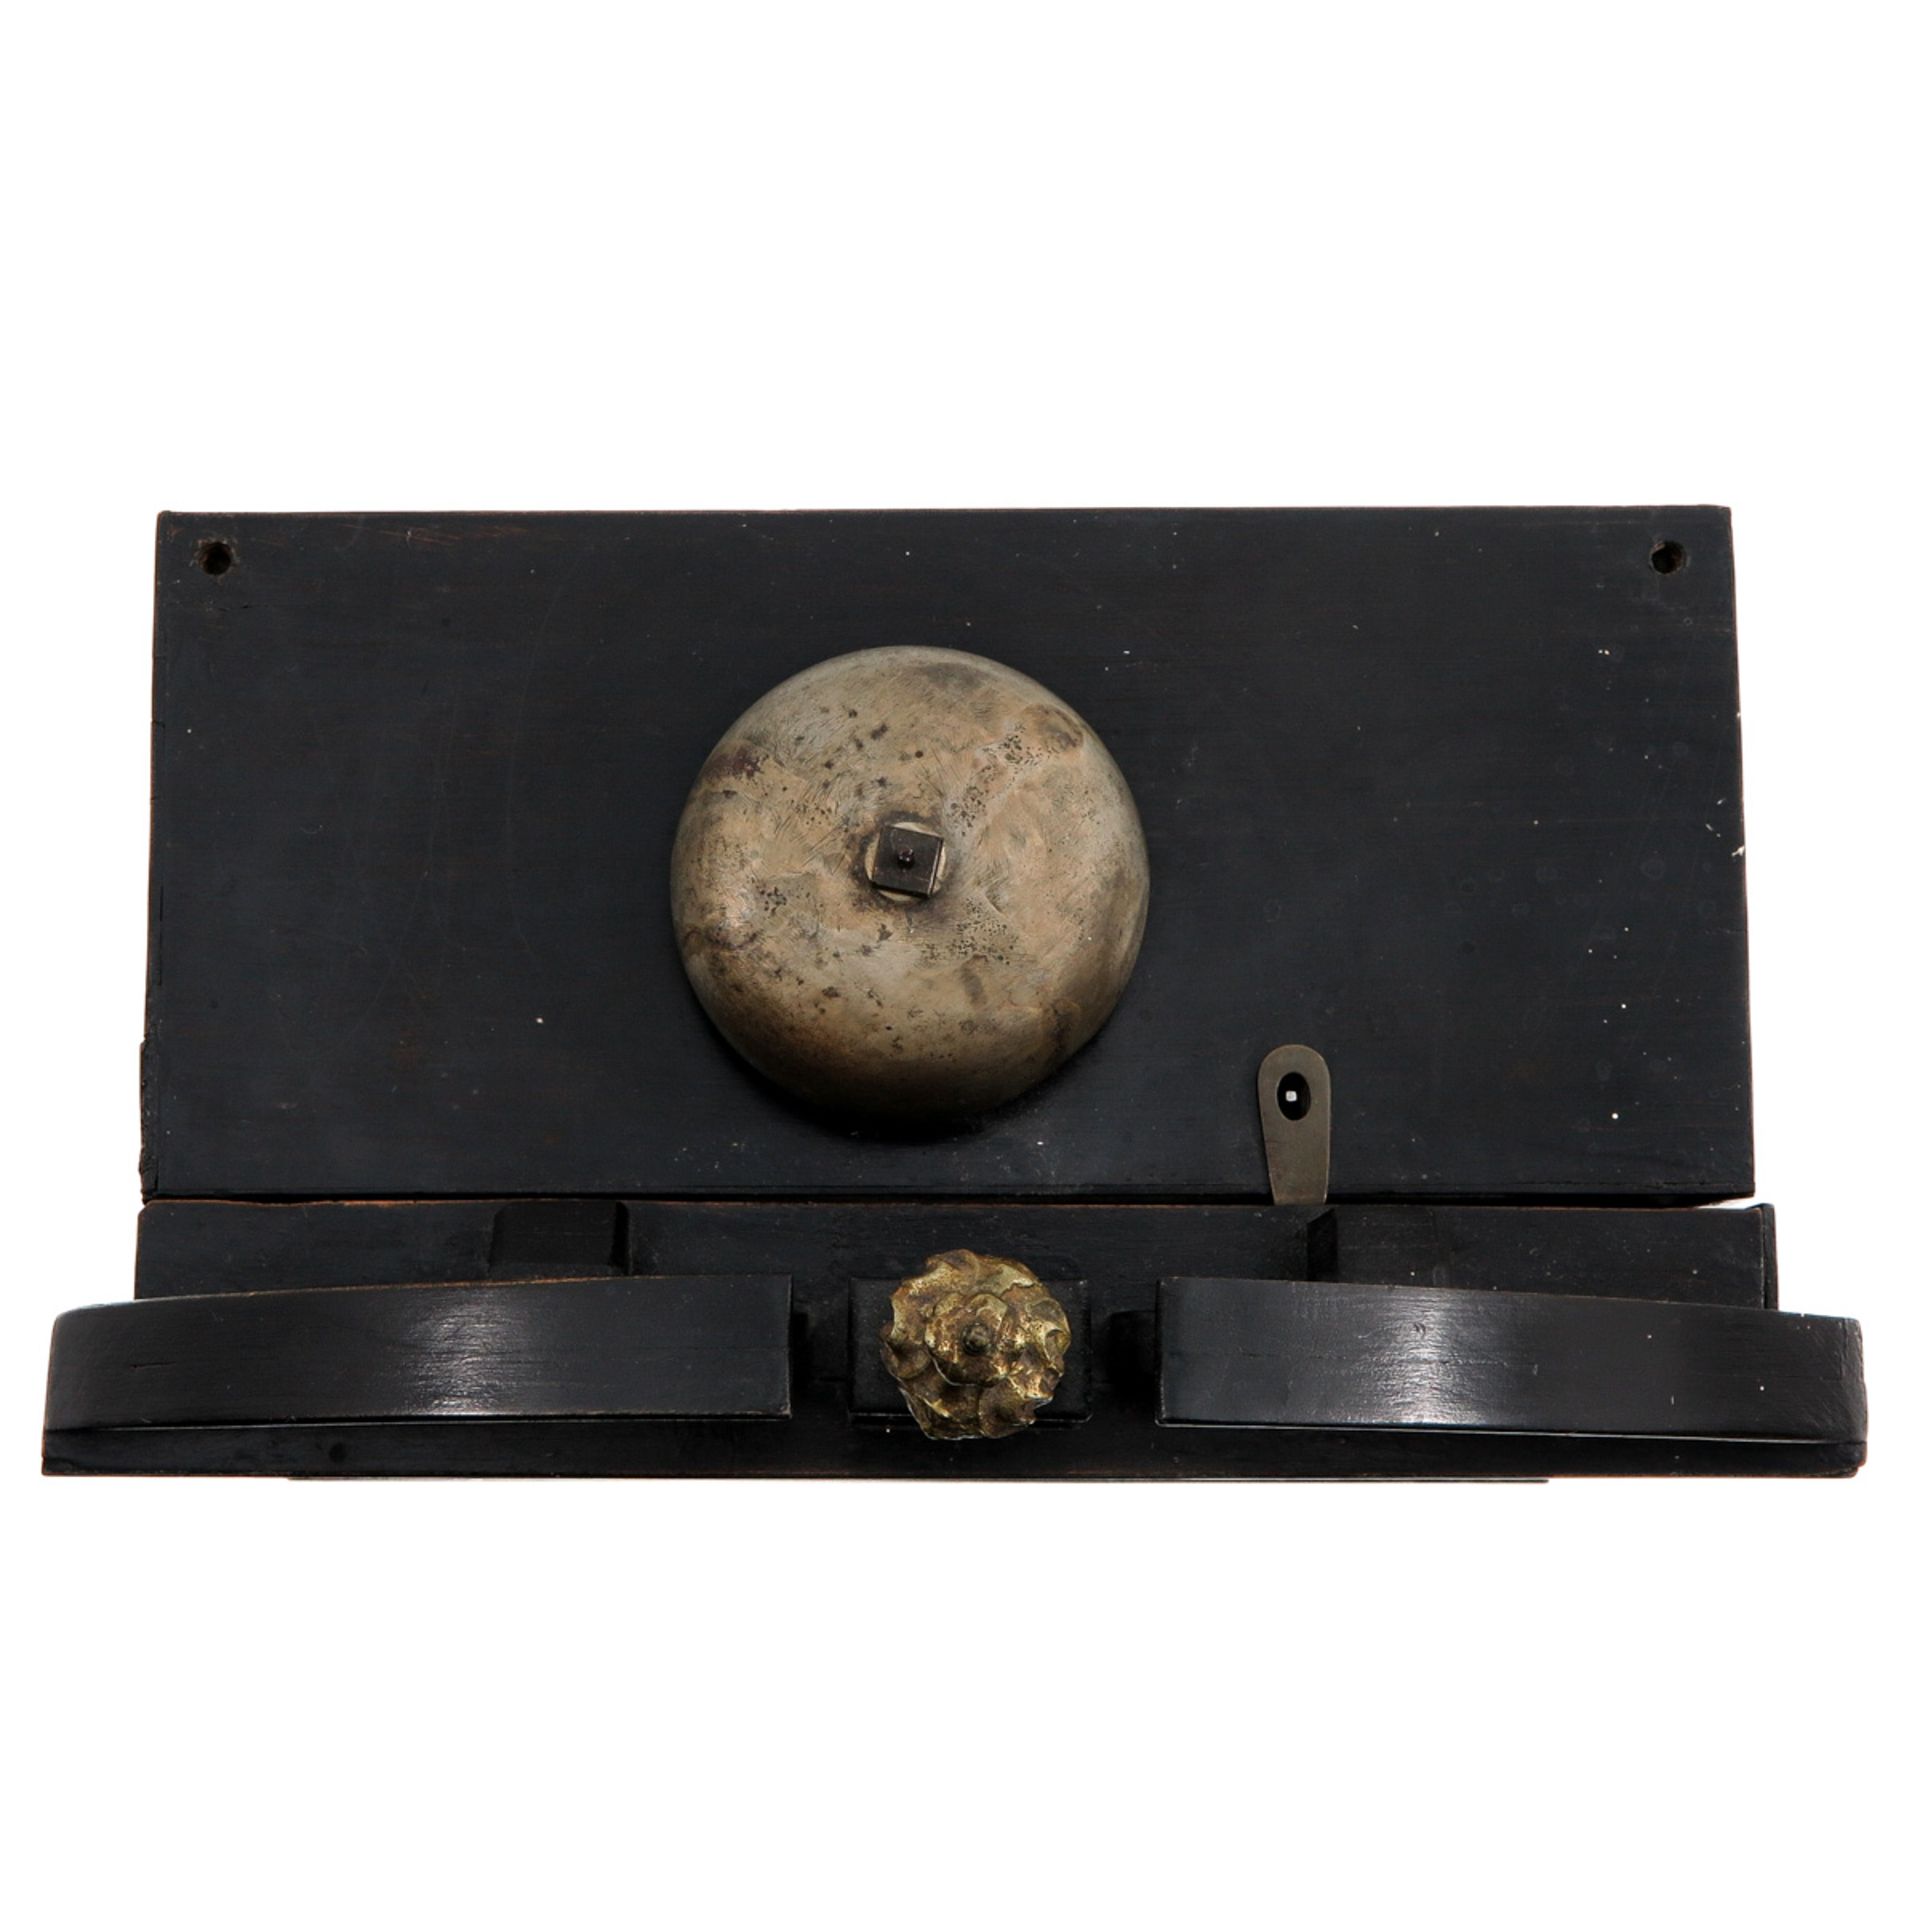 A 17th Century Hague Clock or Haagsche Klok Signed Pieter Visbagh - Image 5 of 9